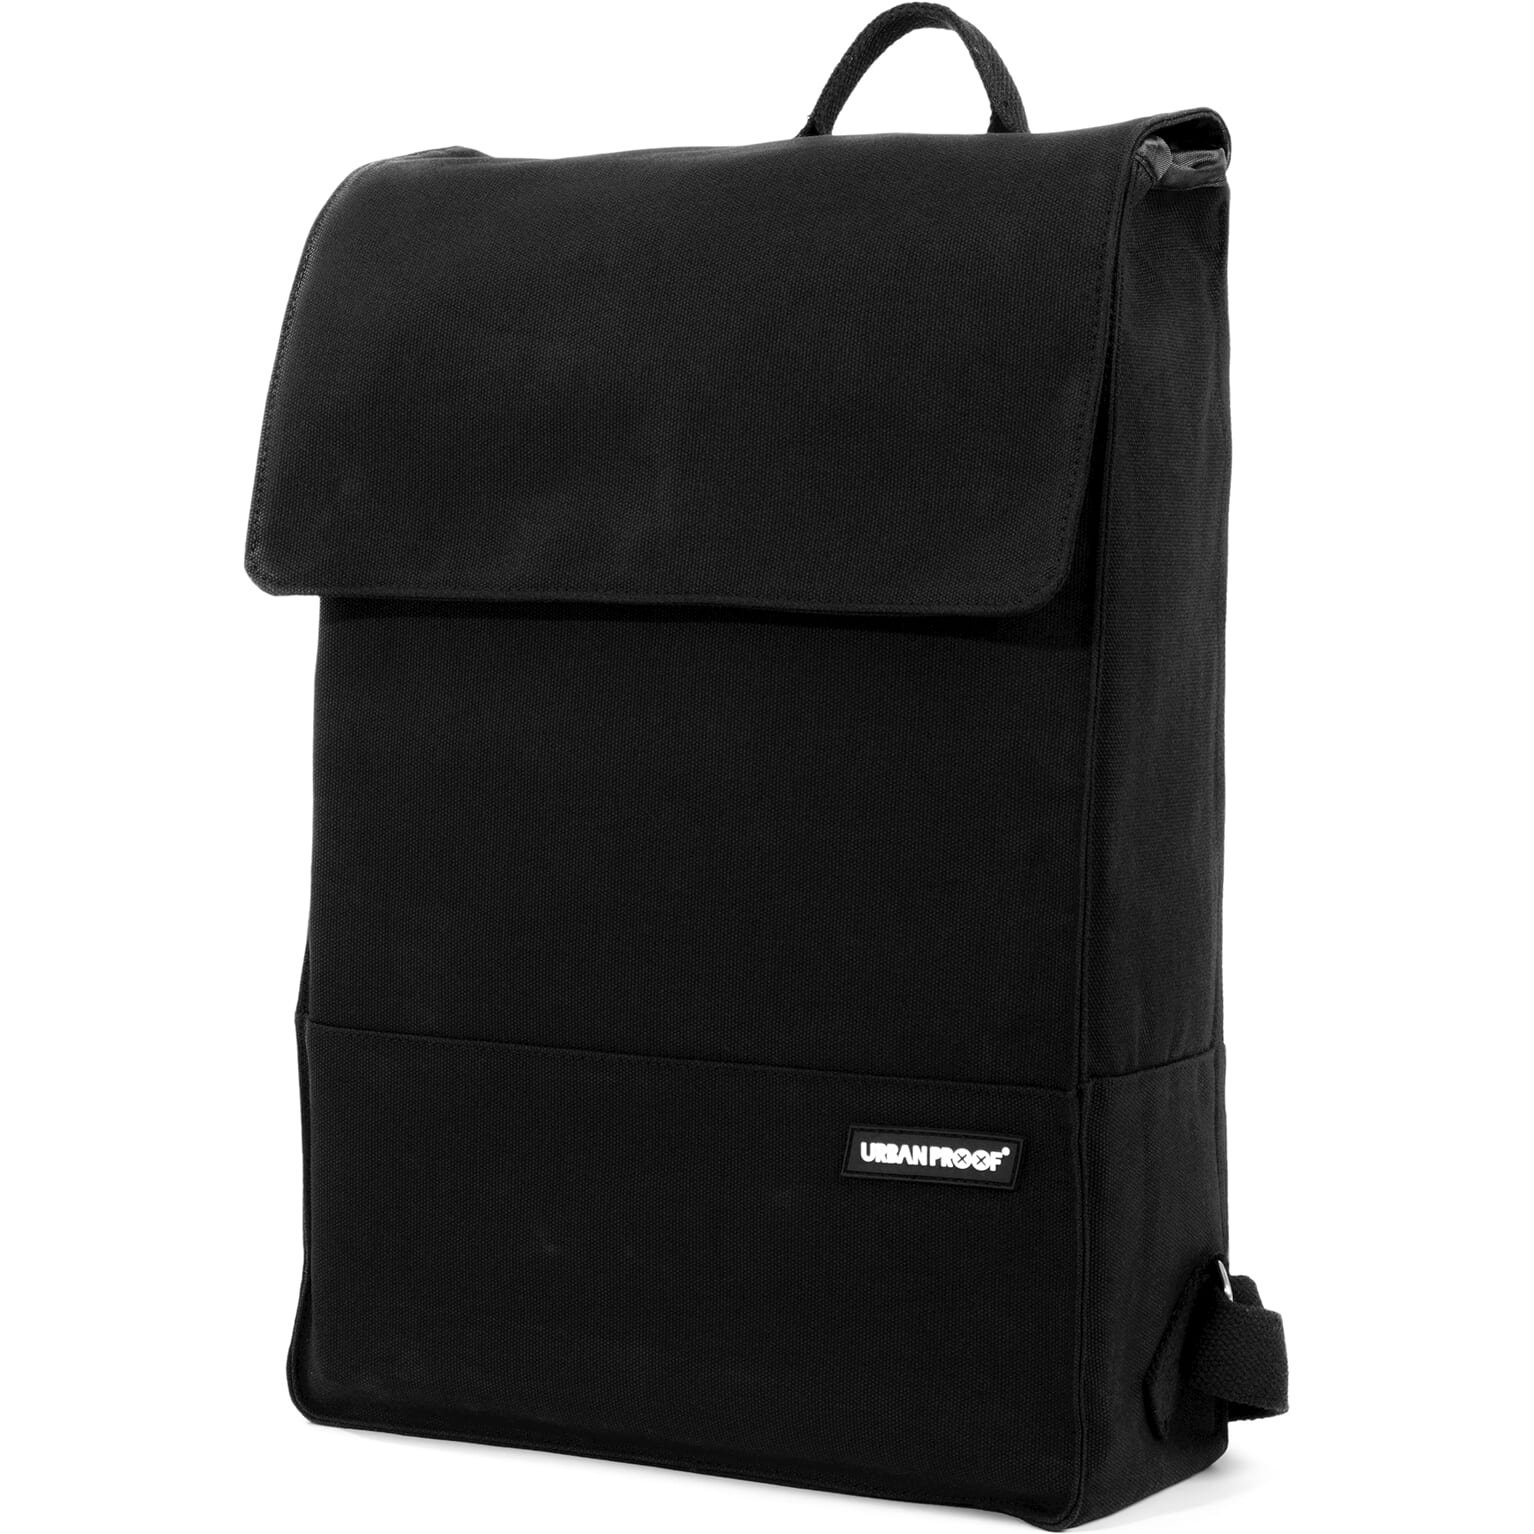 URBAN PROOF city backpack 15L recycled zwart